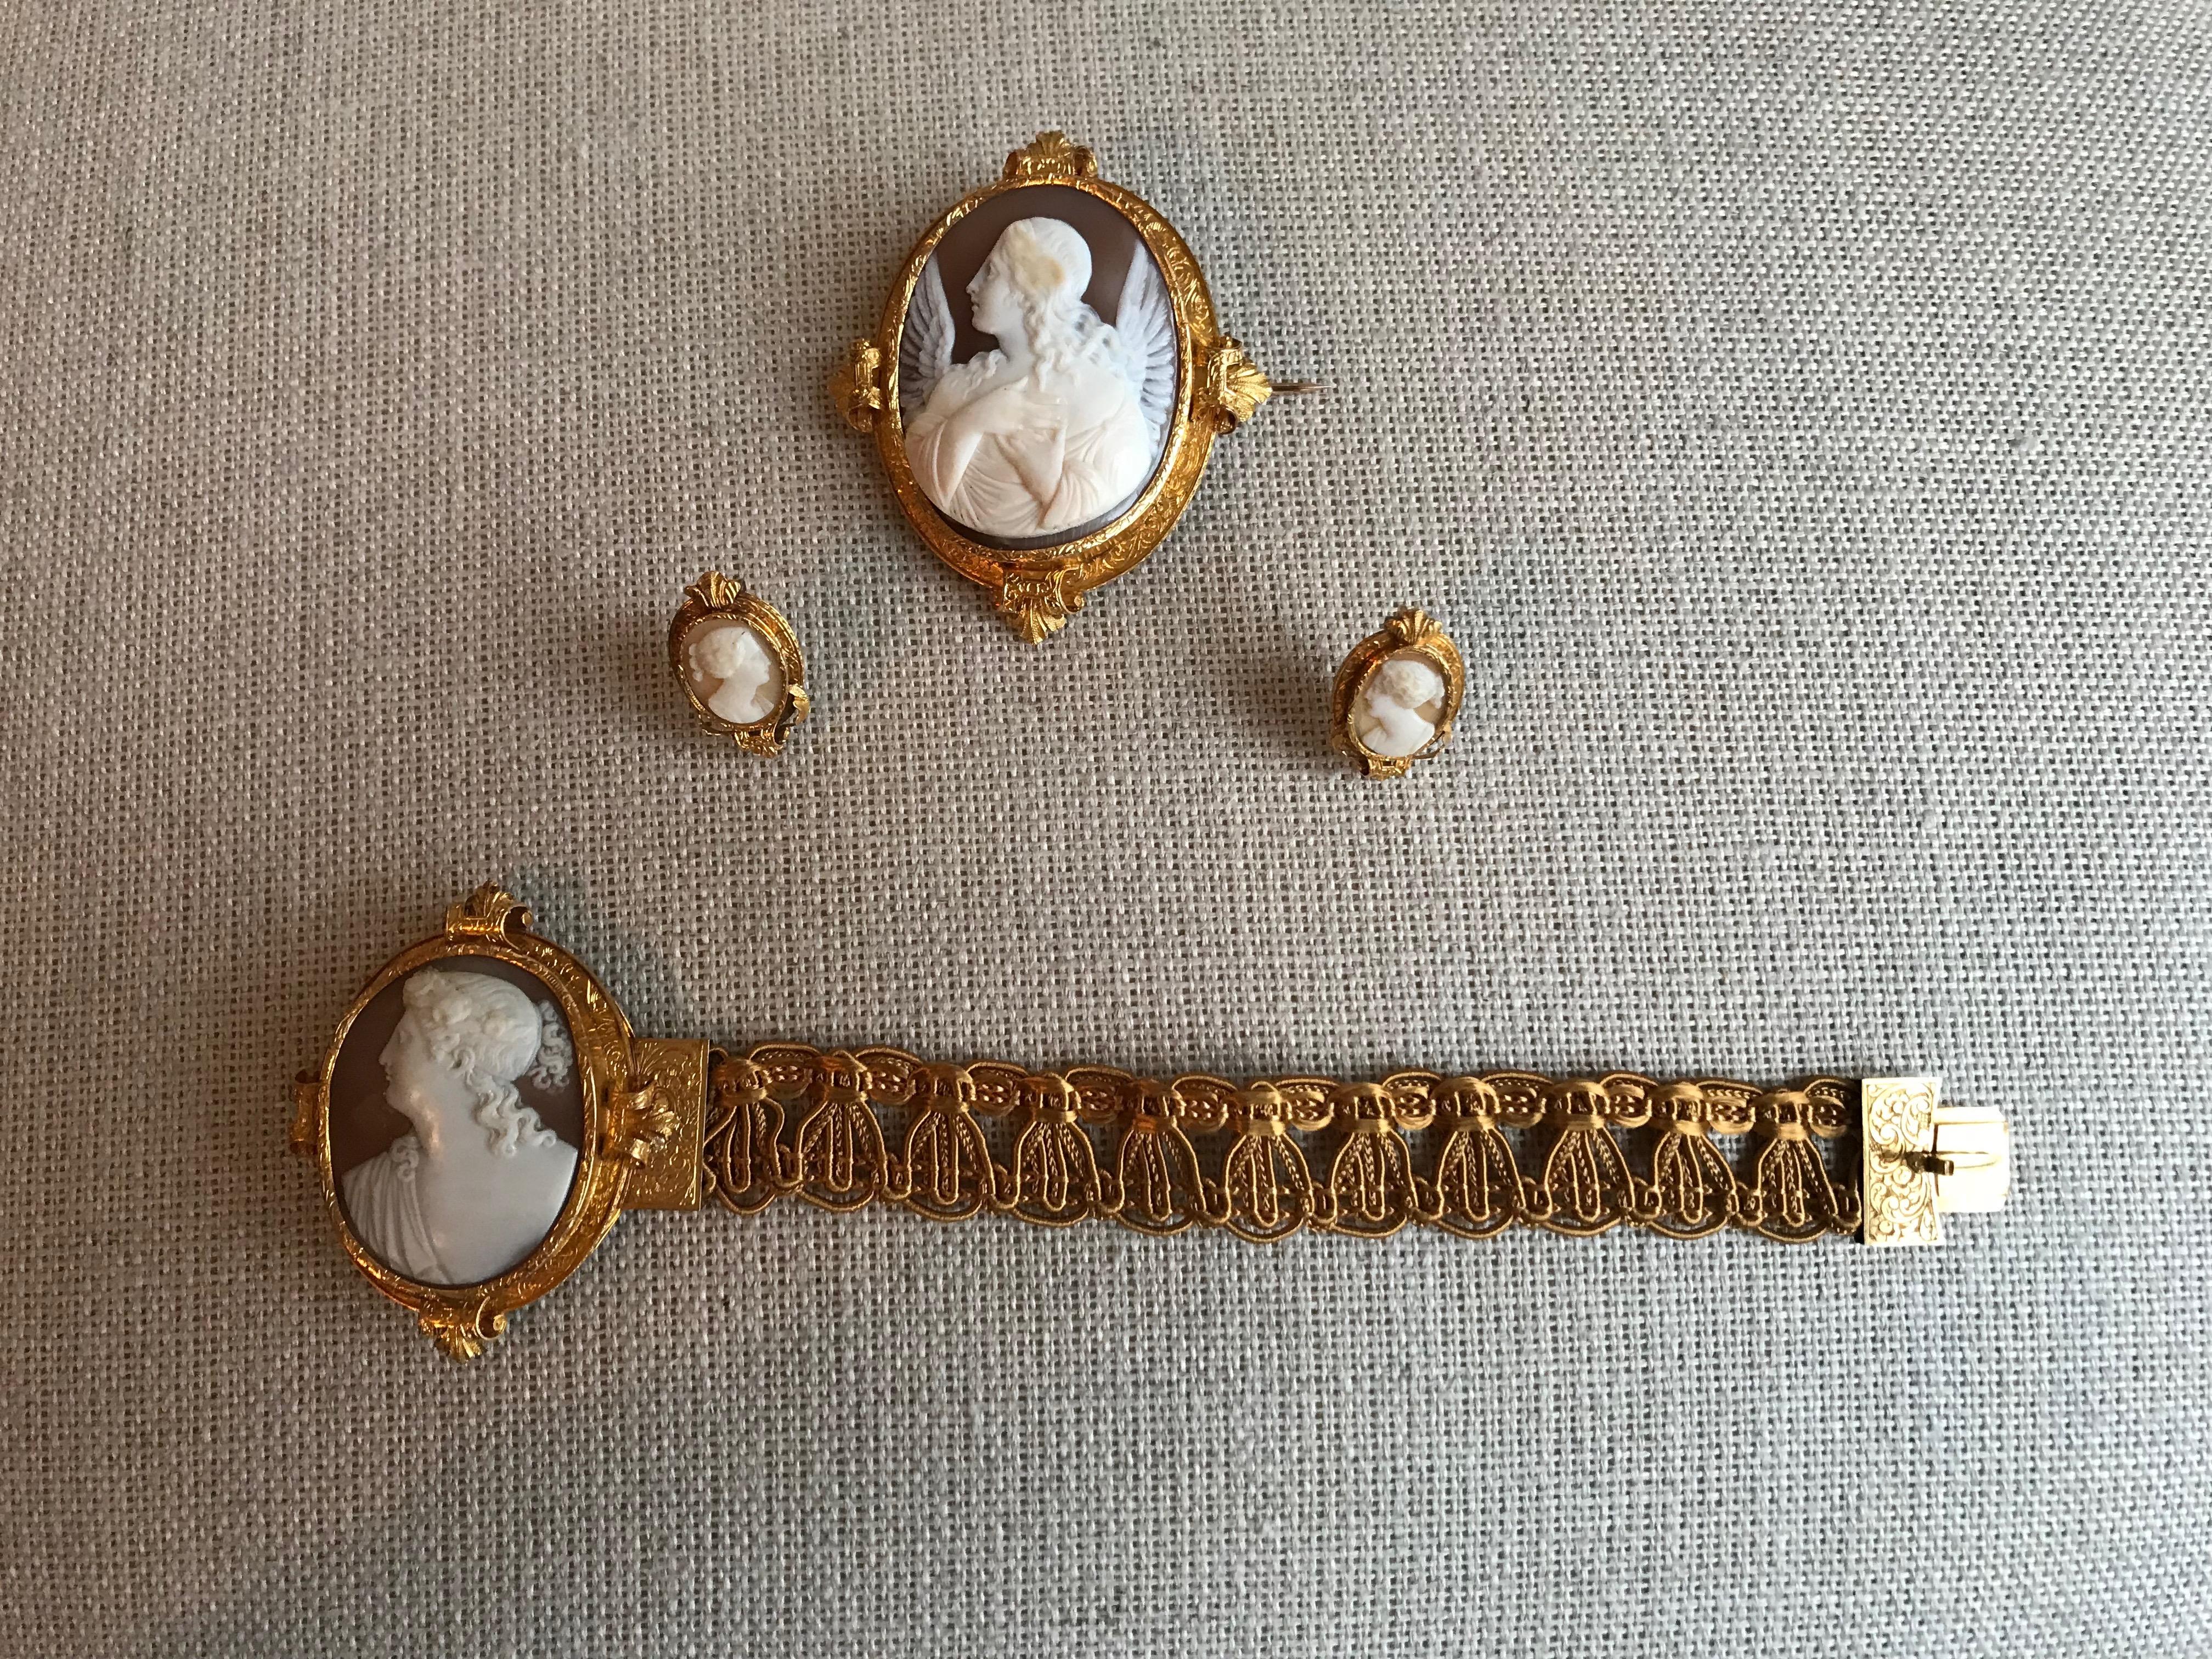  Froment-Meurice Set in 18 Carat, Yellow Gold and Cameo, 19th Century 3